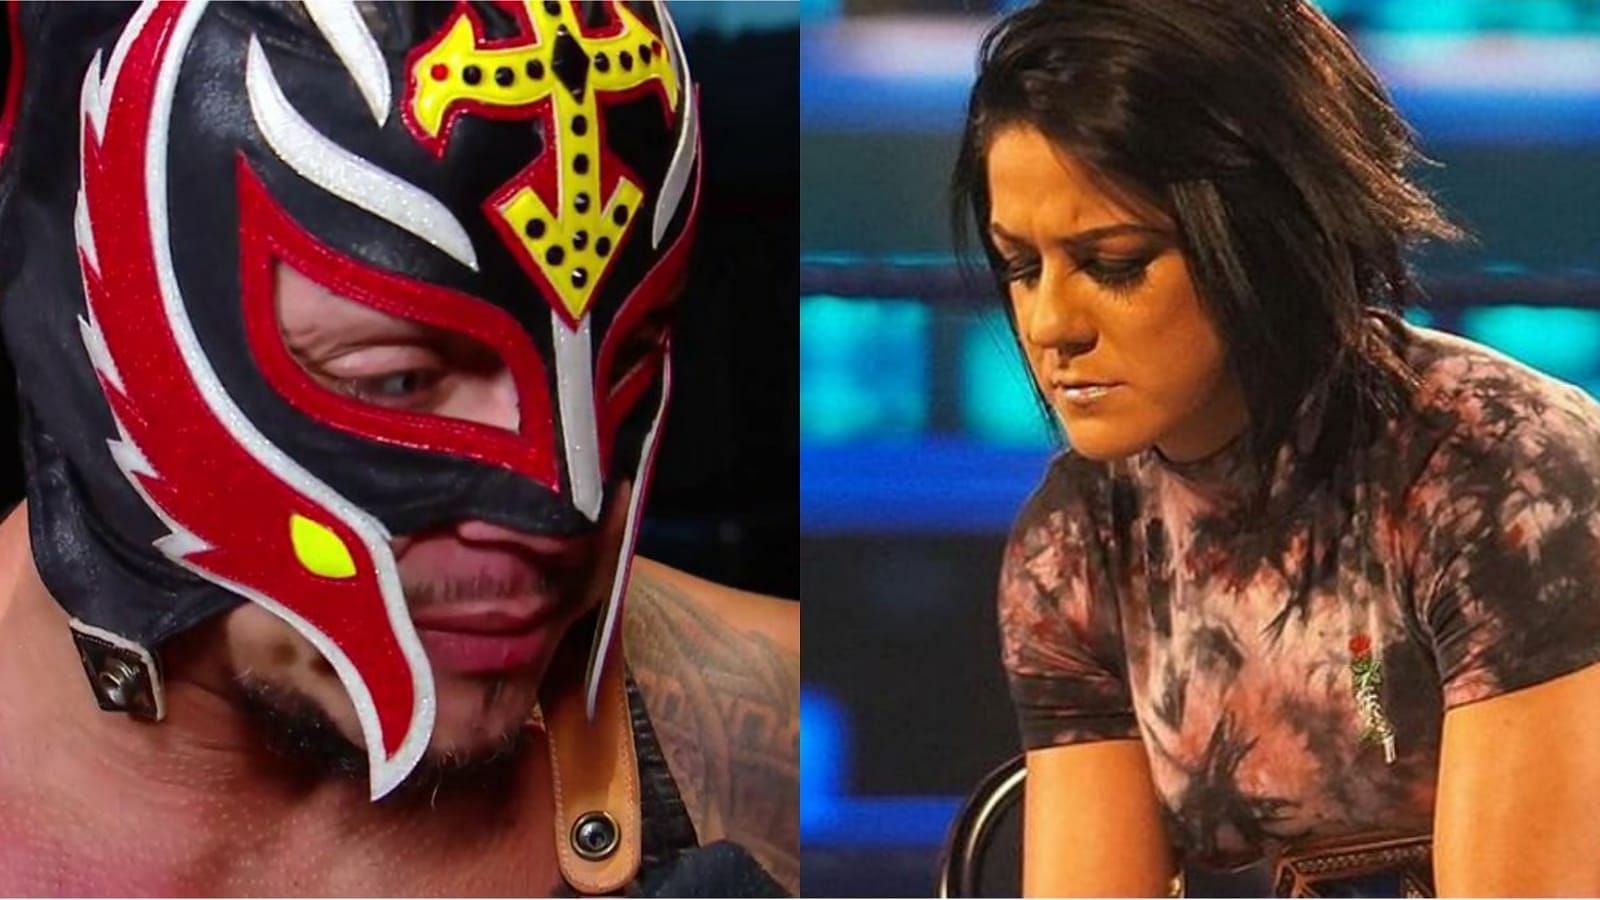 Rey Mysterio (left) and Bayley (right)